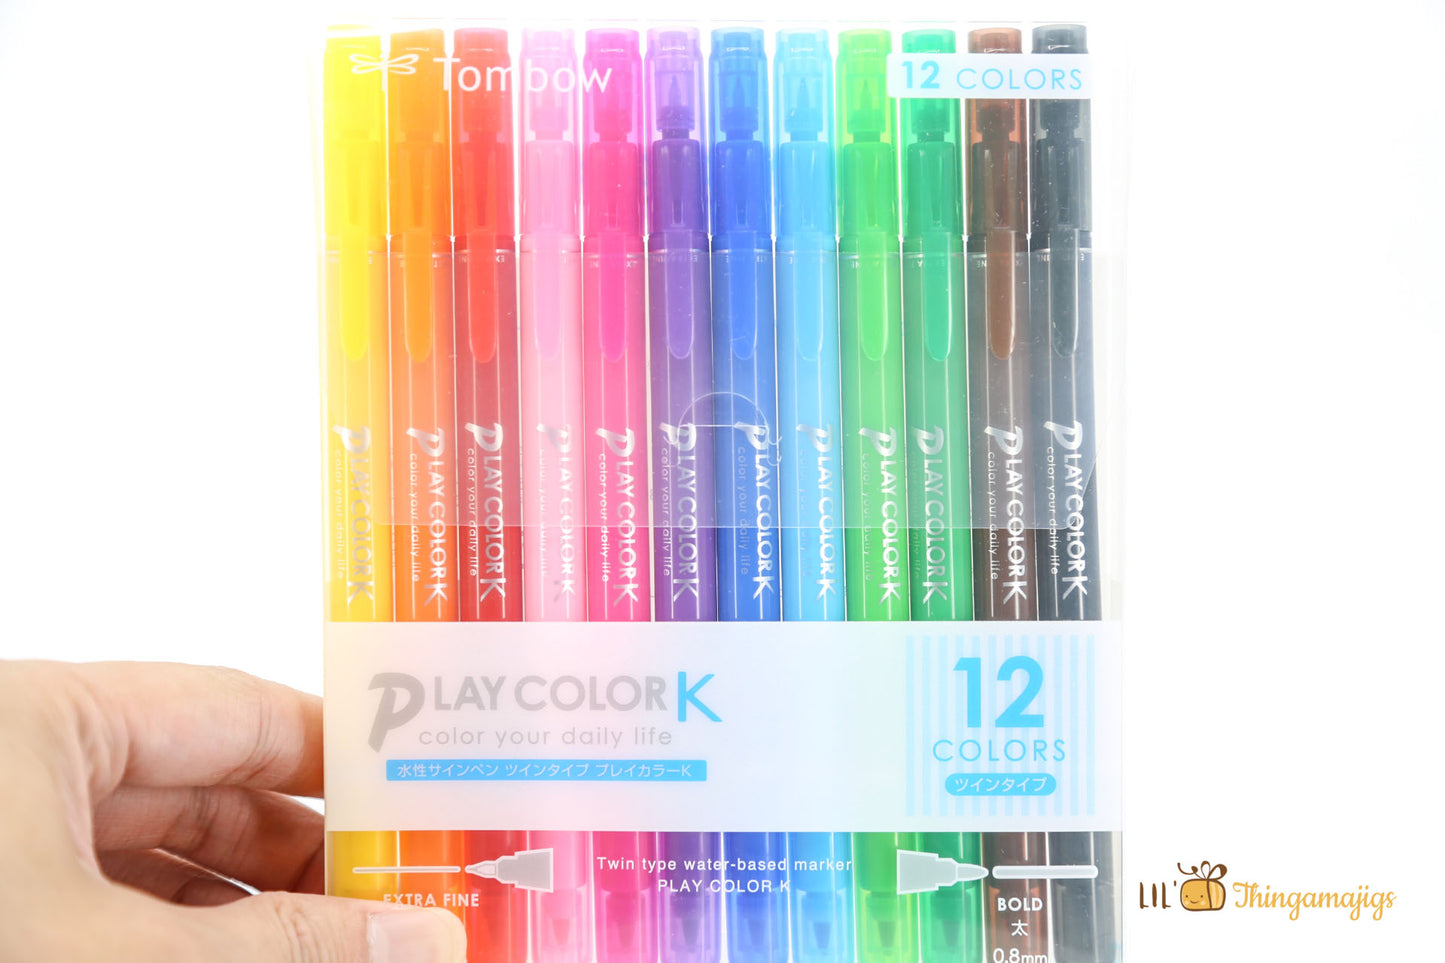 Tombow Play Color K Double-sided Marker 12 color set - 0.3mm and 0.8mm